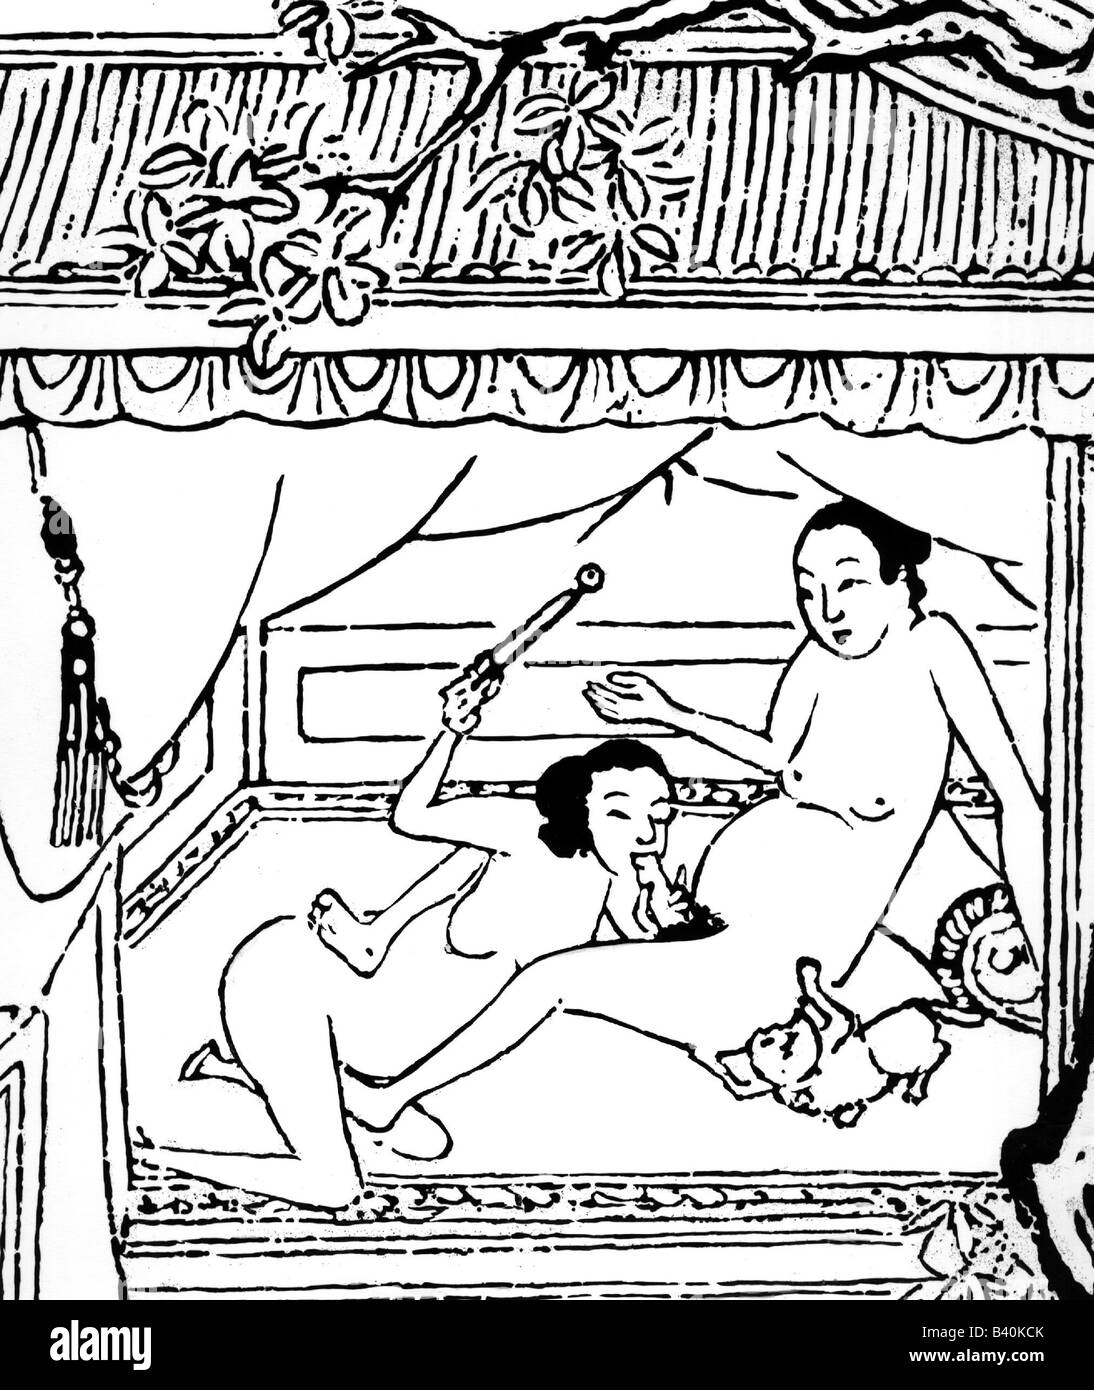 erotic, China, man and woman during fellatio, woodcut to the novel King Ping Mei, Asia, historic, historical, oral sex, sexual, intimacy, people, women, female, men, male Stock Photo pic picture